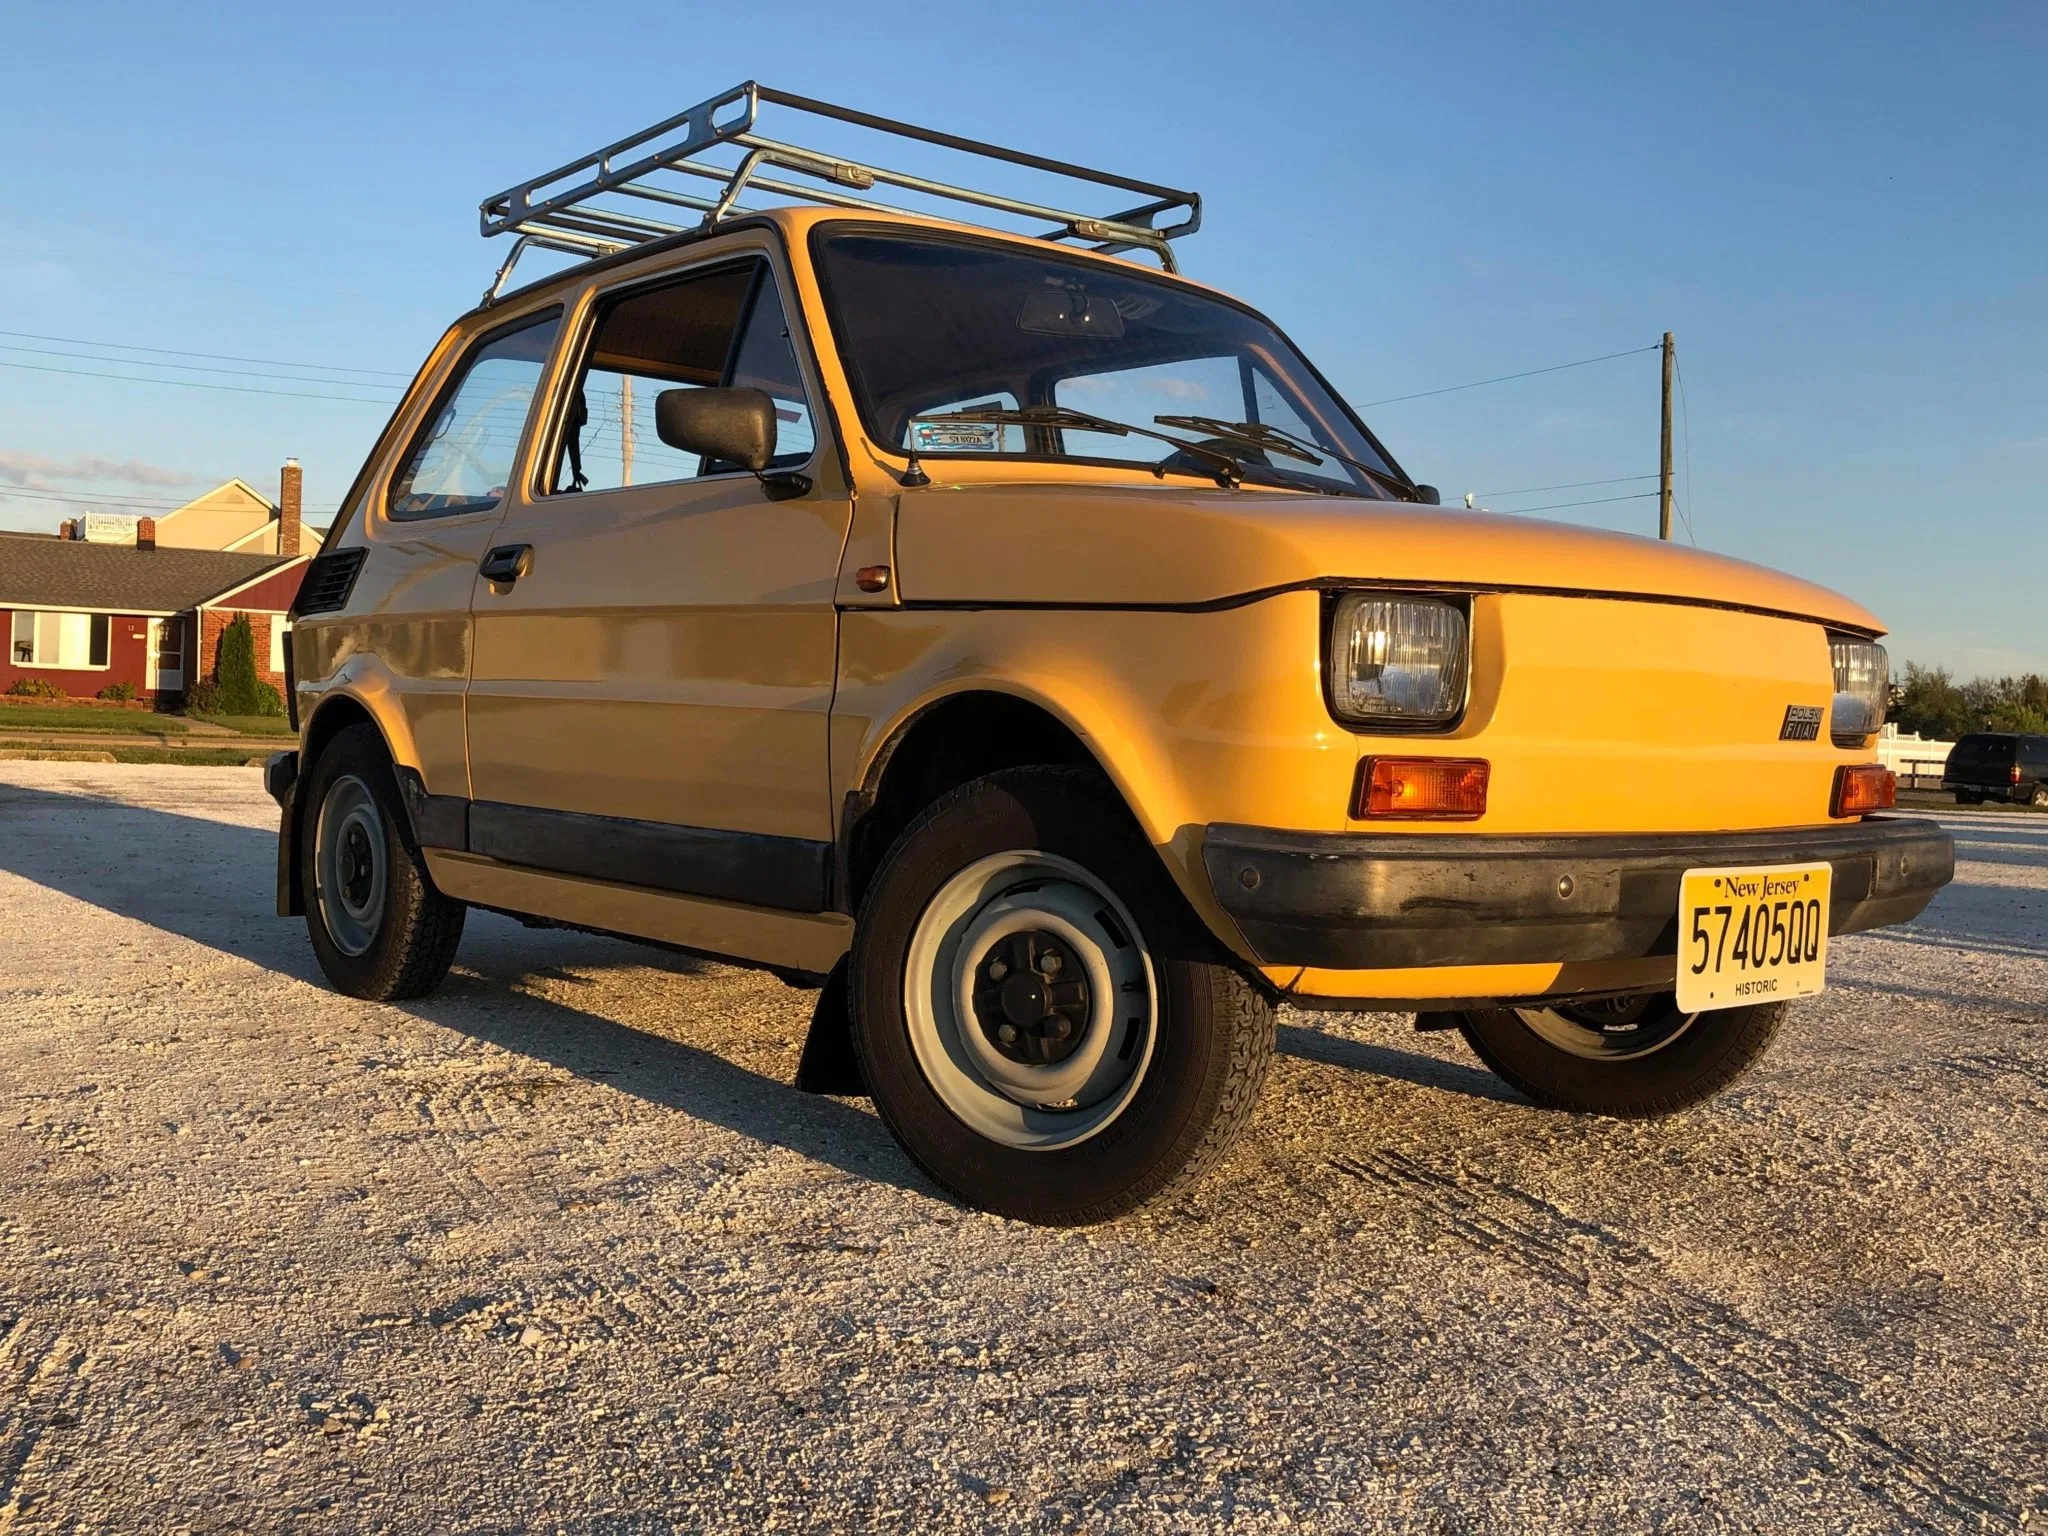 Yellow 1989 Fiat 126p hatchback with a roof rack on the beach